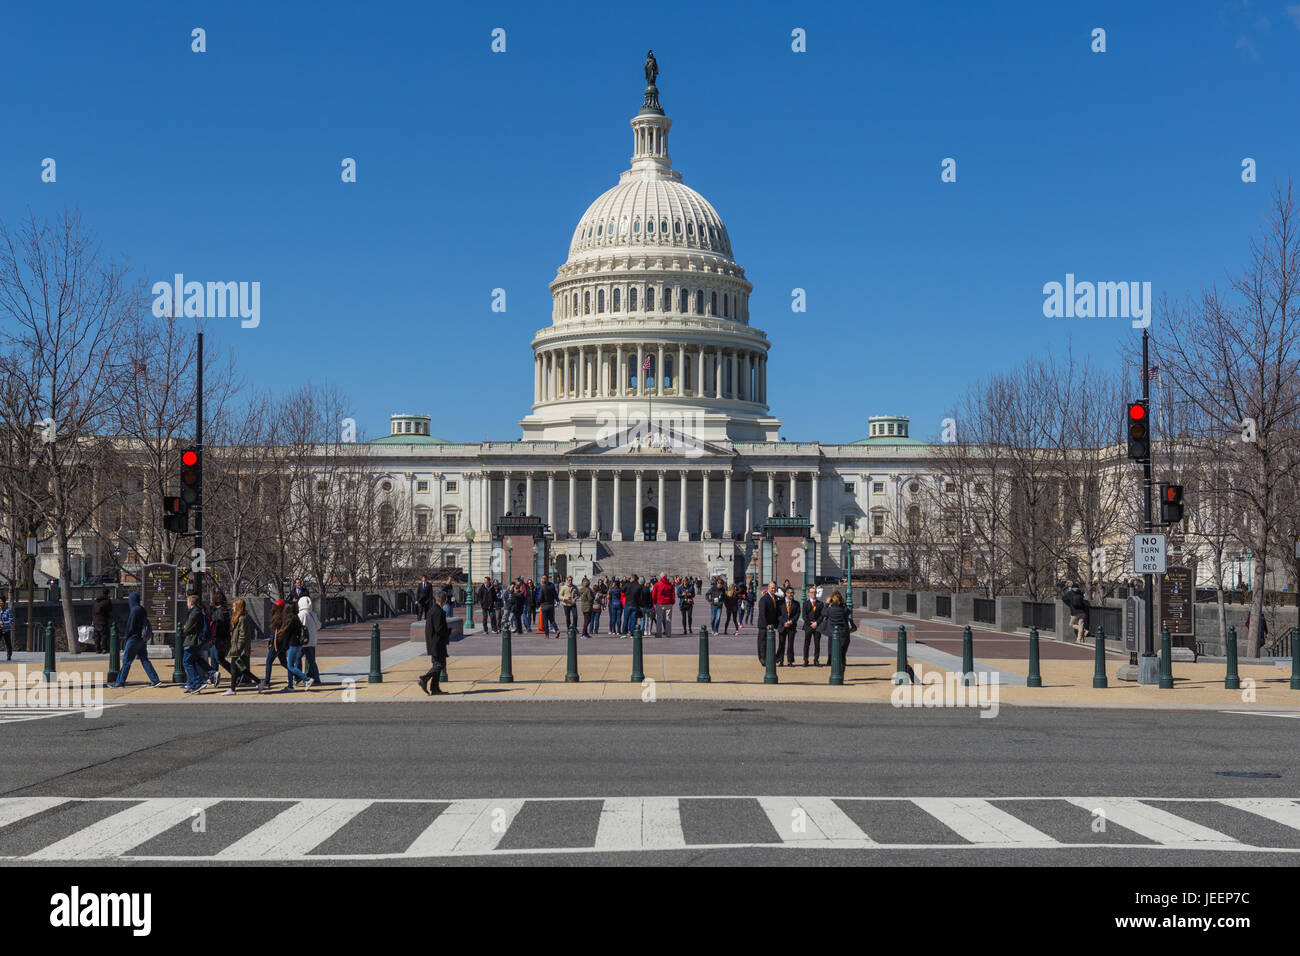 Tourists and visitors at the front of the U.S. Capitol Building in Washington, DC. Stock Photo